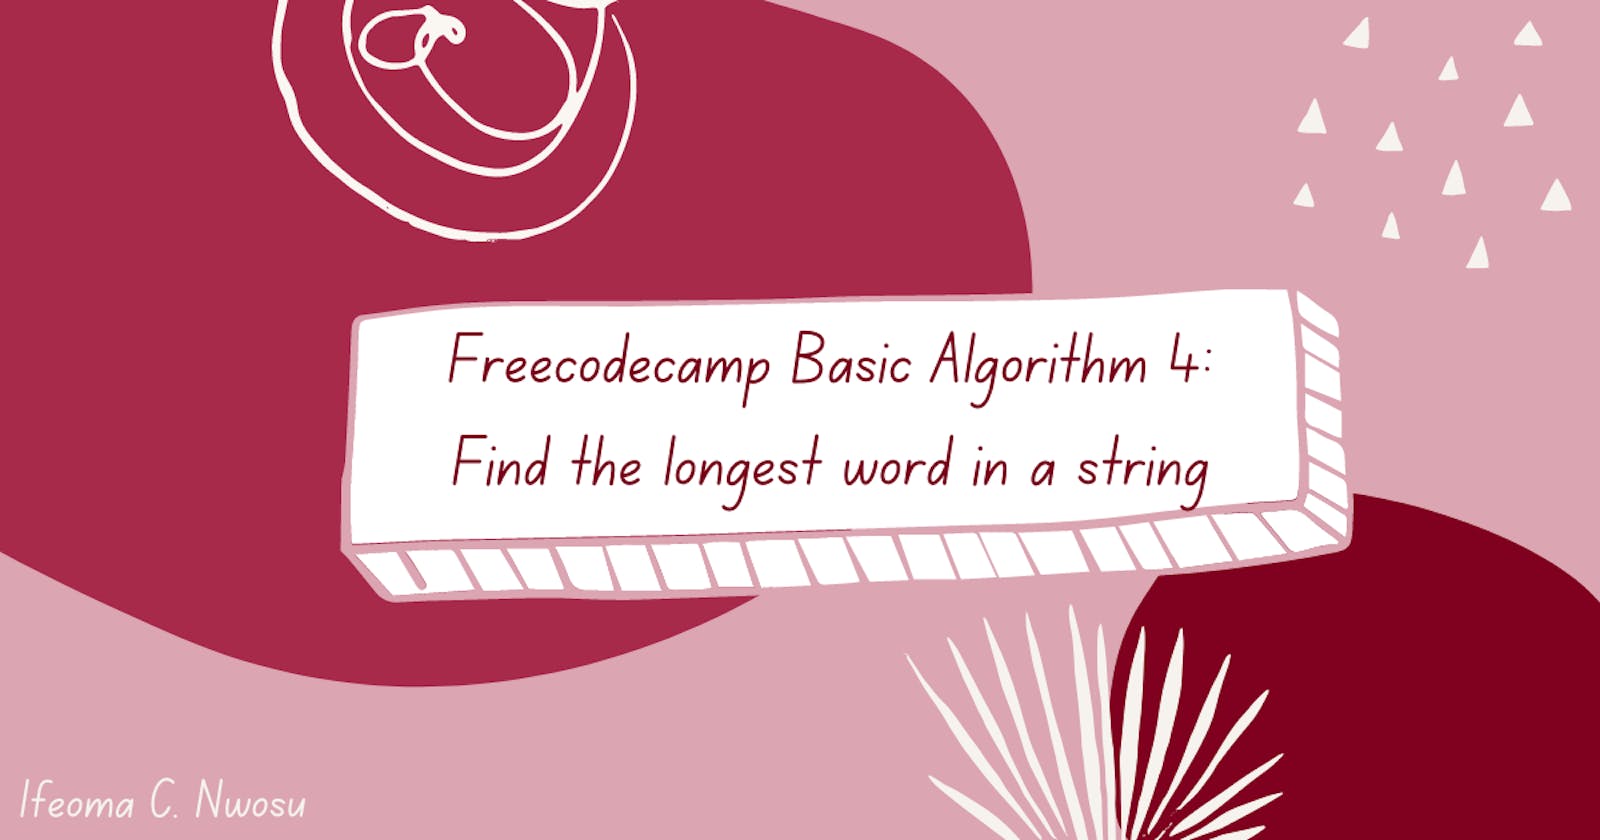 FreeCodeCamp: Find the longest word in a string. Basic Algorithm 4